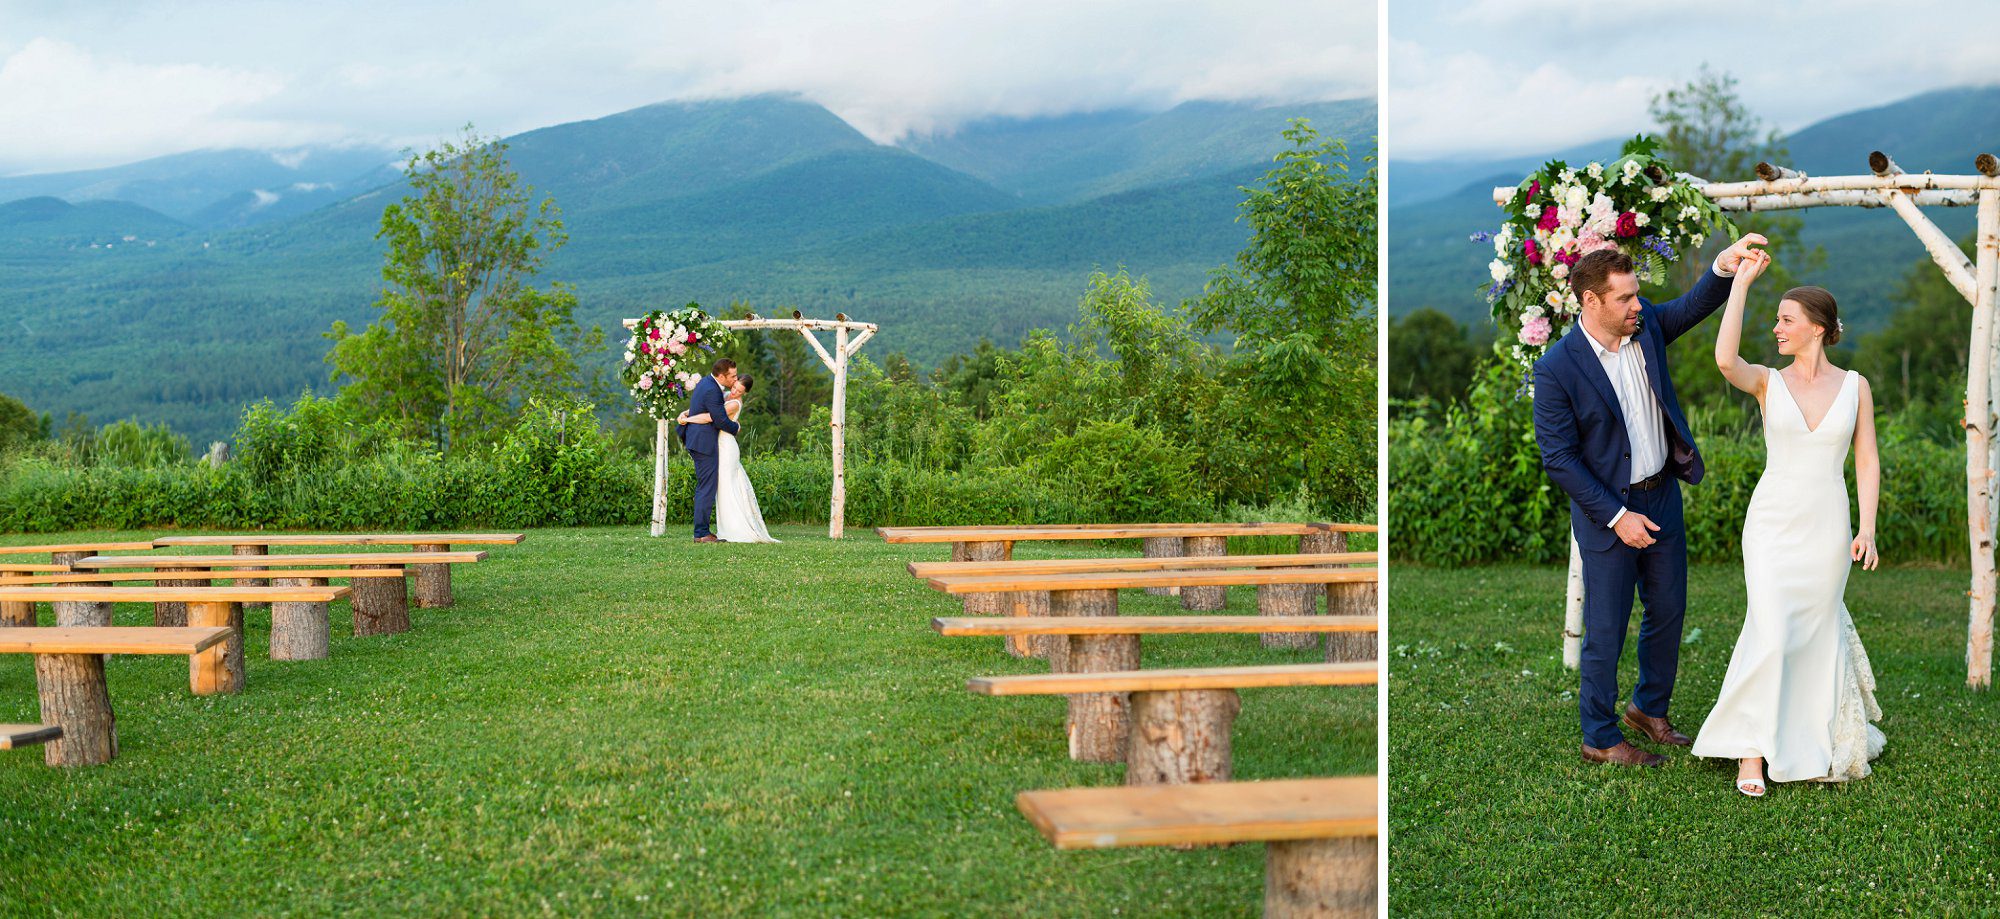 Beautiful July Wedding at The Toad Hill Farm in Franconia, NH | Erika Follansbee Photography